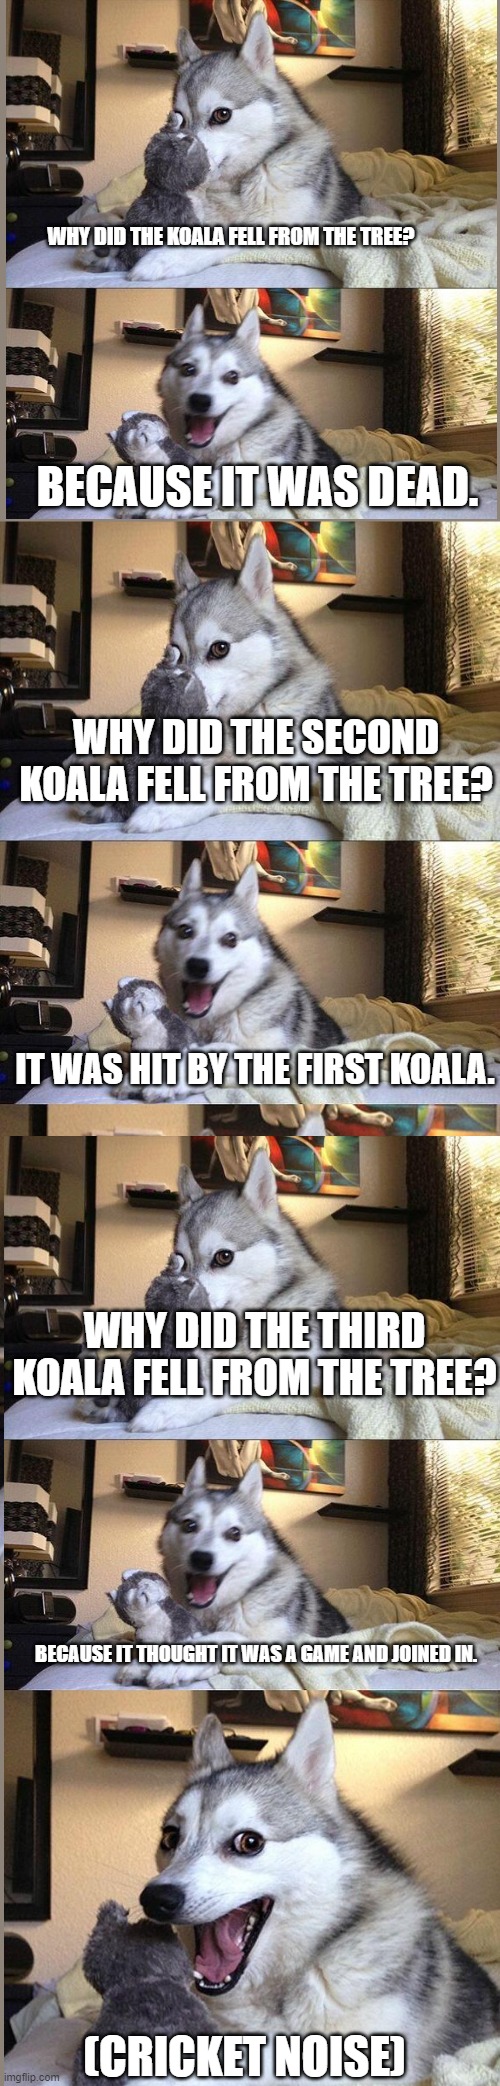 Bad Pun Dog | WHY DID THE KOALA FELL FROM THE TREE? BECAUSE IT WAS DEAD. WHY DID THE SECOND KOALA FELL FROM THE TREE? IT WAS HIT BY THE FIRST KOALA. WHY DID THE THIRD KOALA FELL FROM THE TREE? BECAUSE IT THOUGHT IT WAS A GAME AND JOINED IN. (CRICKET NOISE) | image tagged in memes,bad pun dog,but not that bad,funny | made w/ Imgflip meme maker